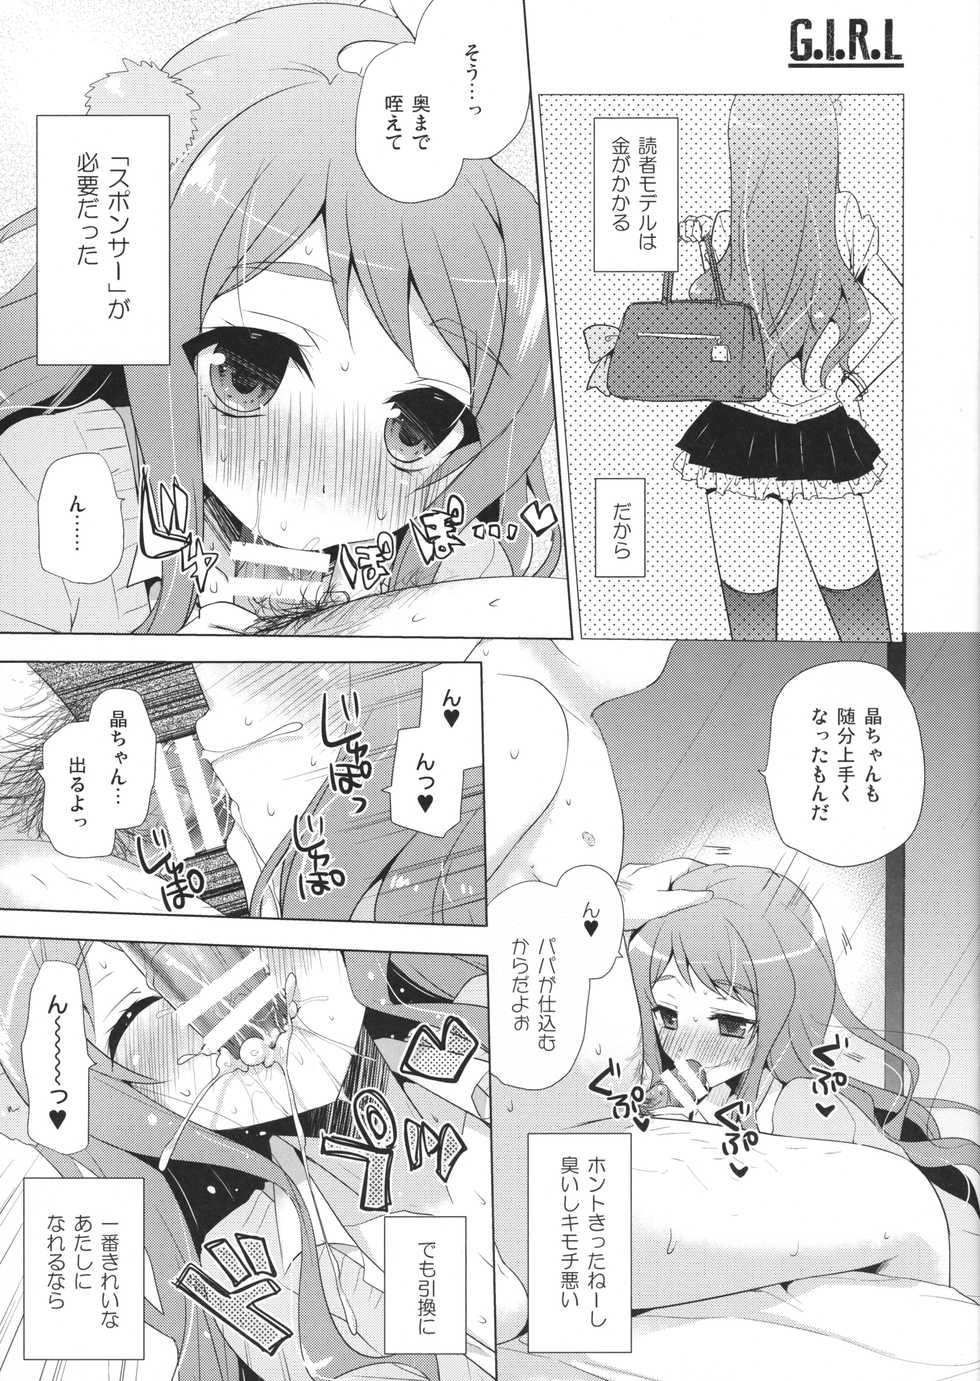 (CT24) [SEM;COLON (Mitsu King)] G.I.R.L (Selector Infected WIXOSS) - Page 15